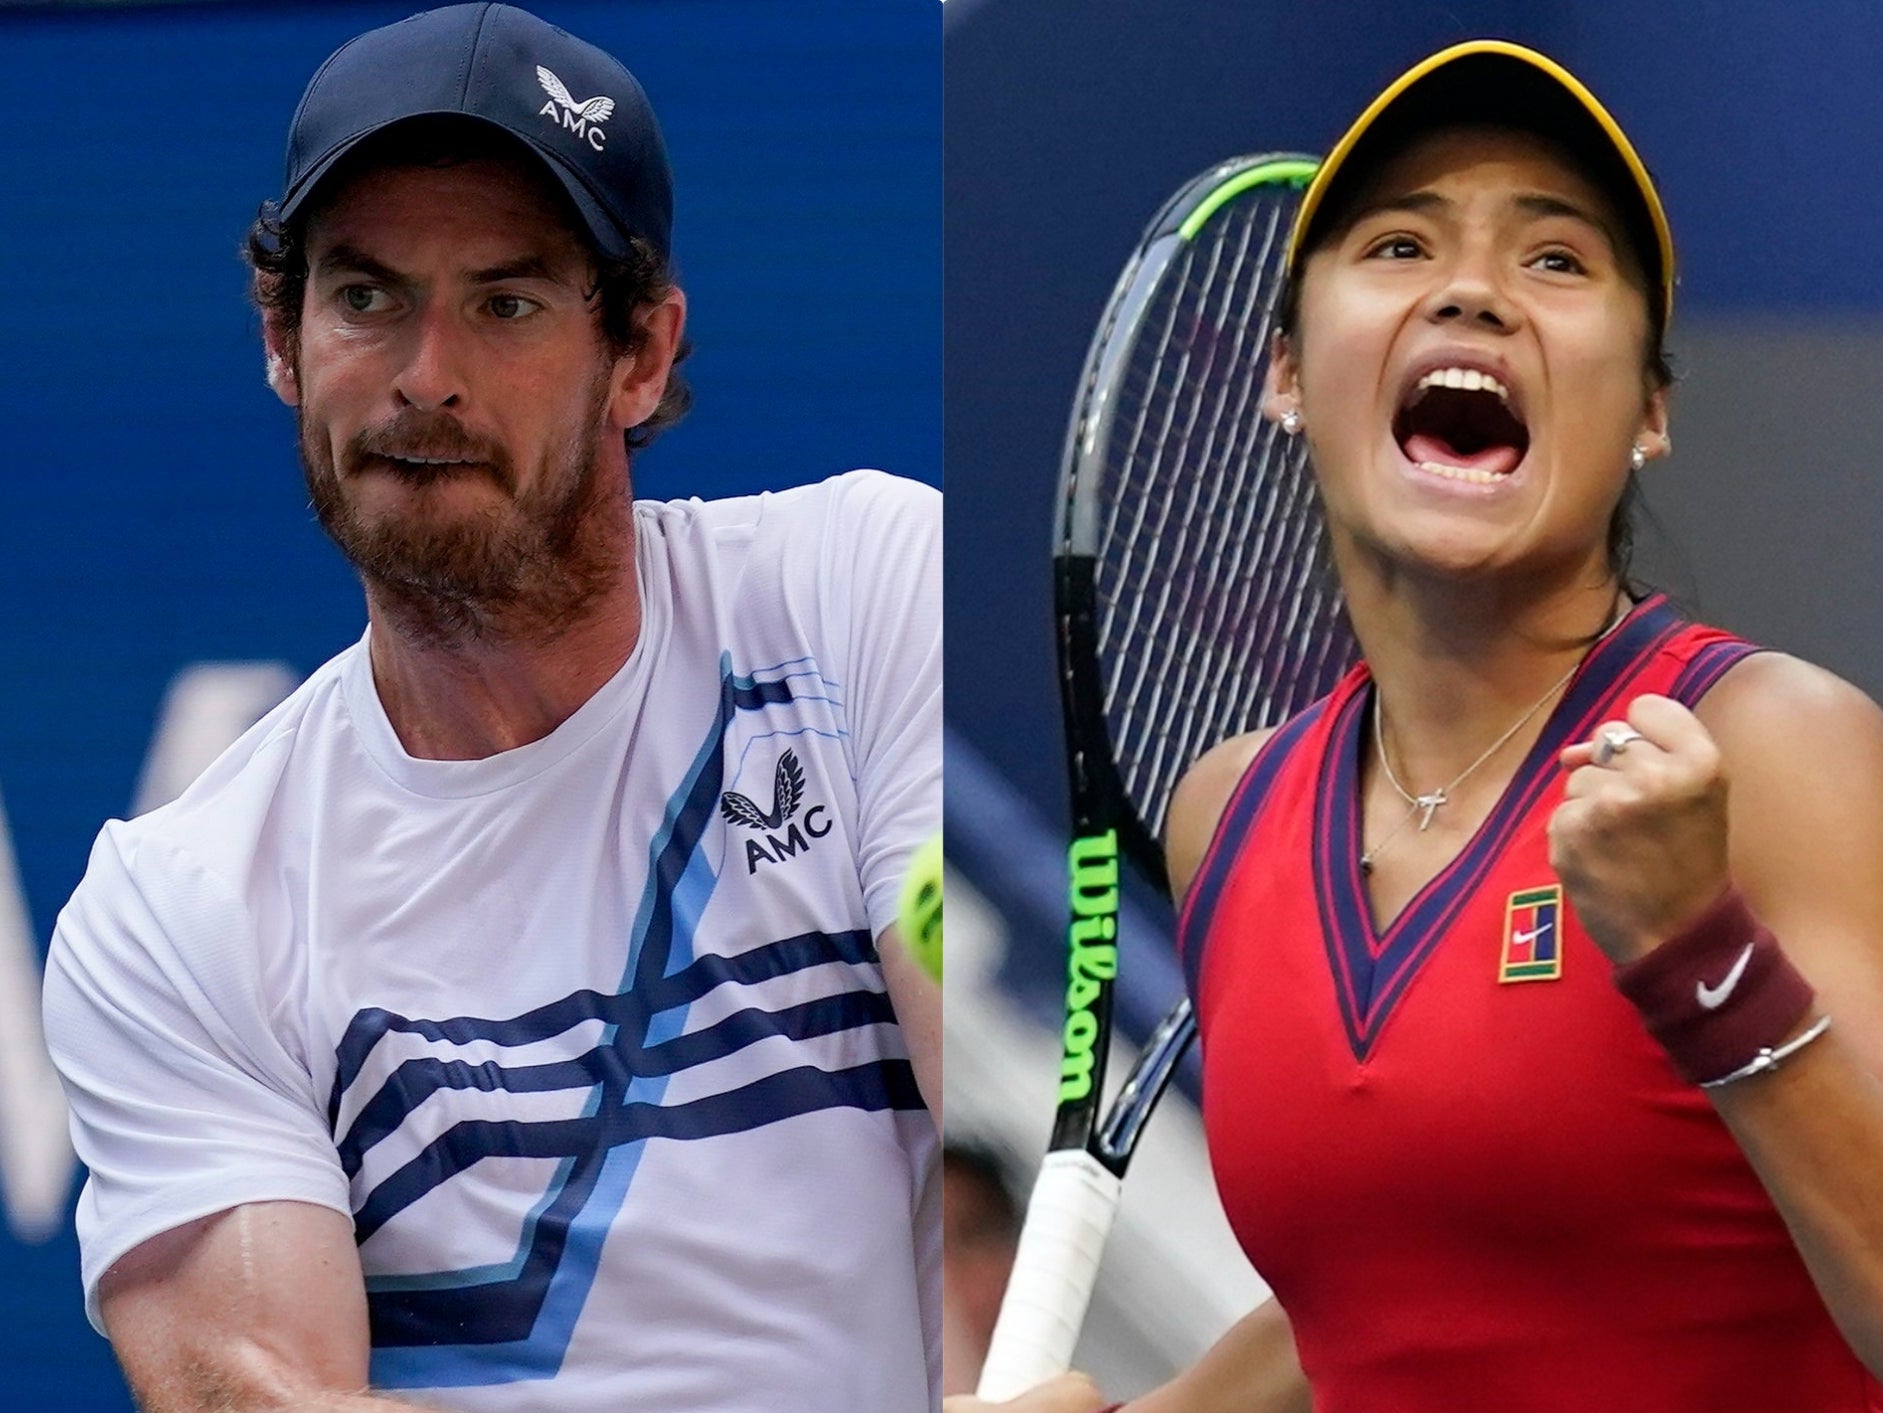 Andy Murray (left) is open to the idea of playing mixed doubles with Emma Raducanu